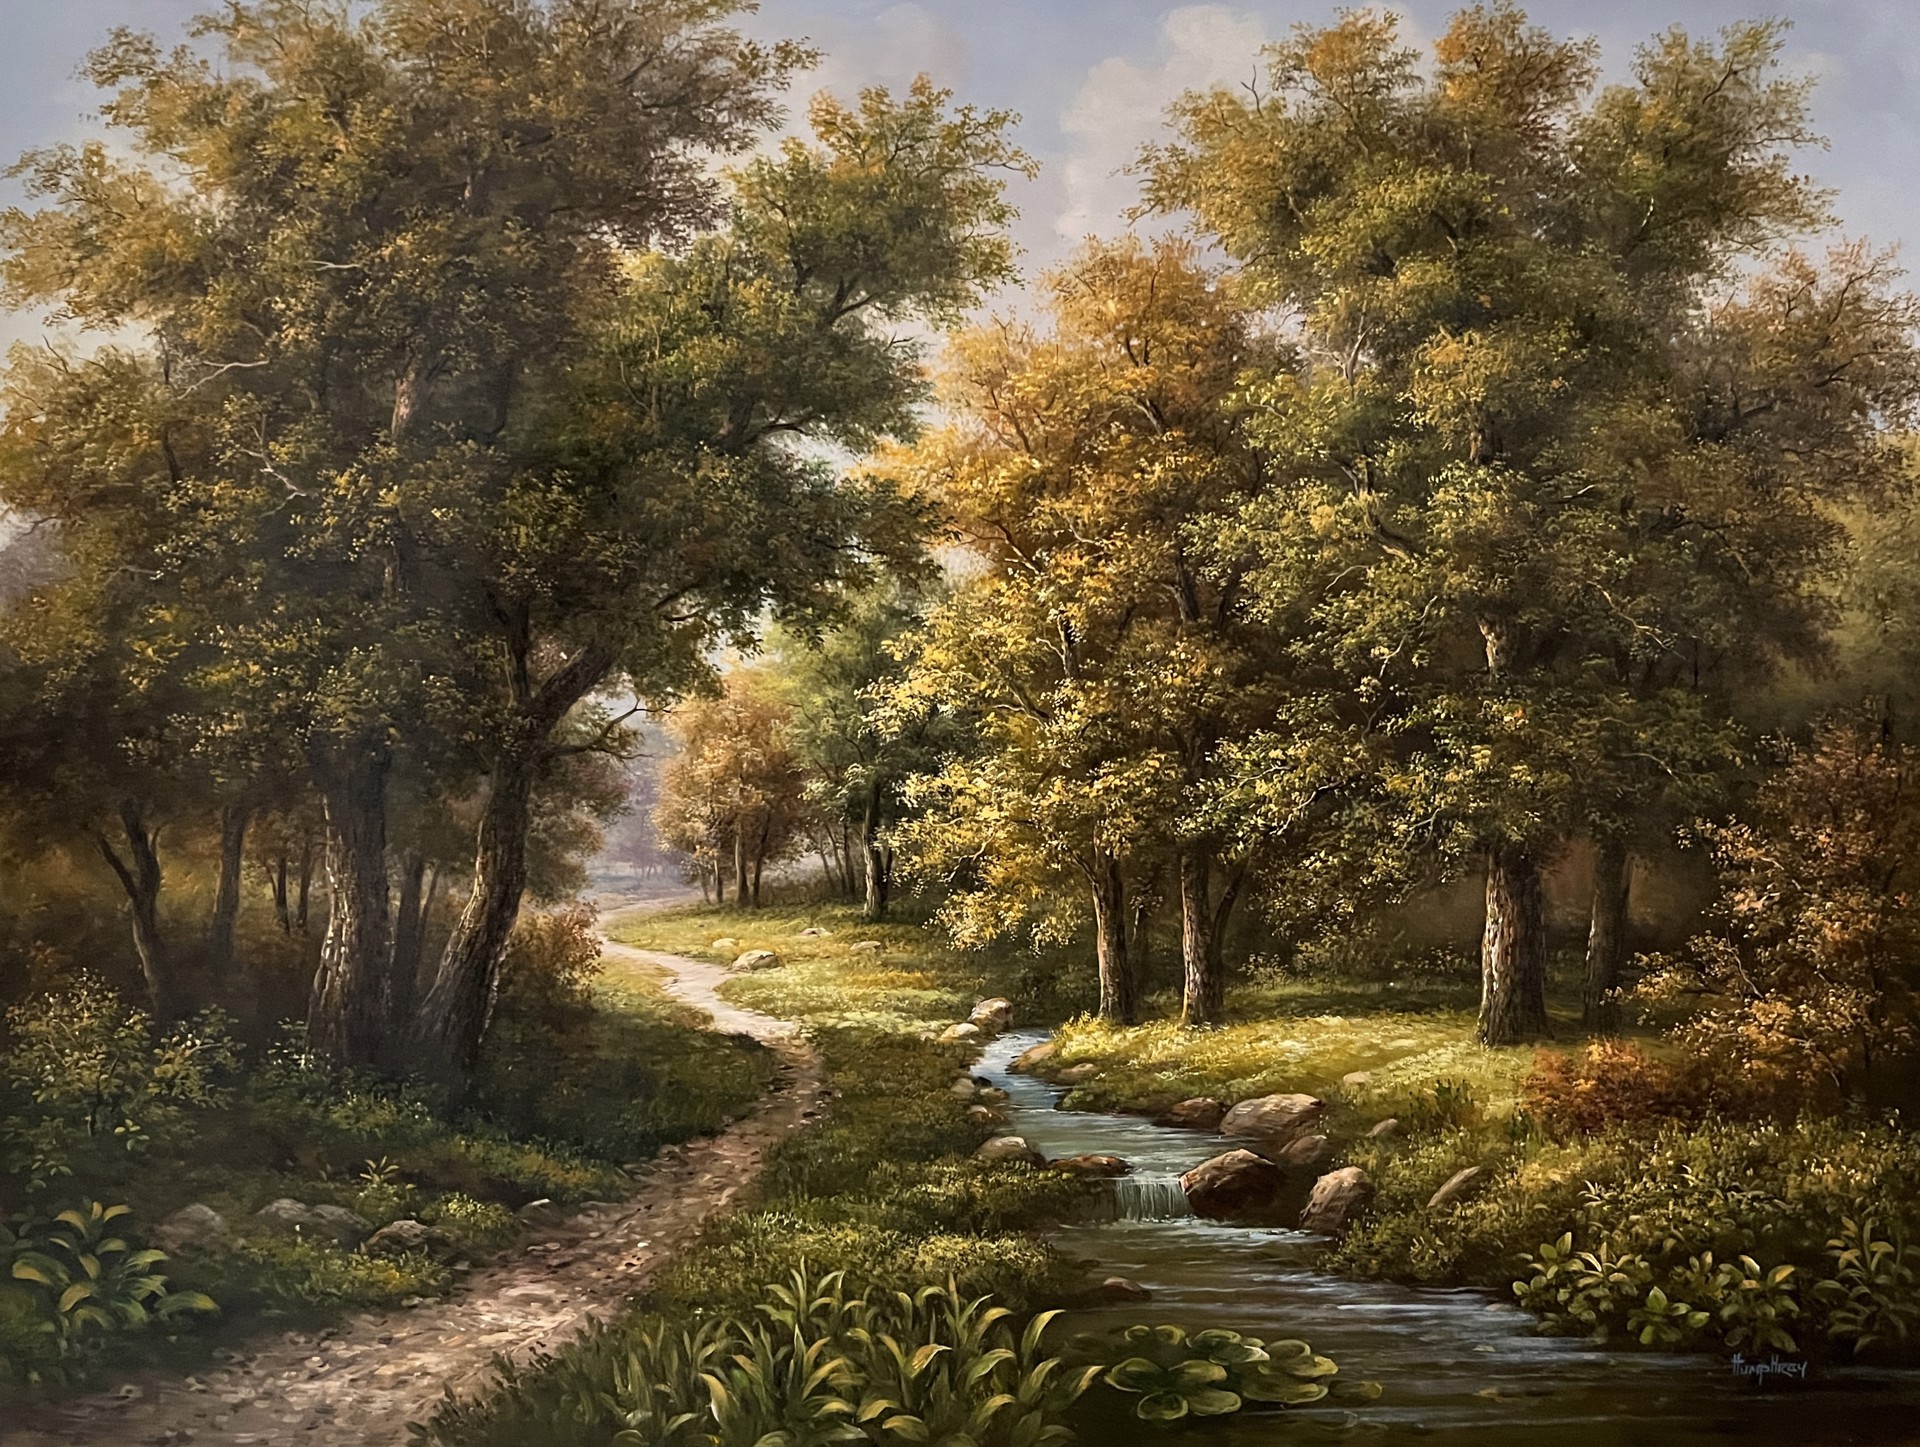 CREEKSIDE TRAIL by HUMPHREY